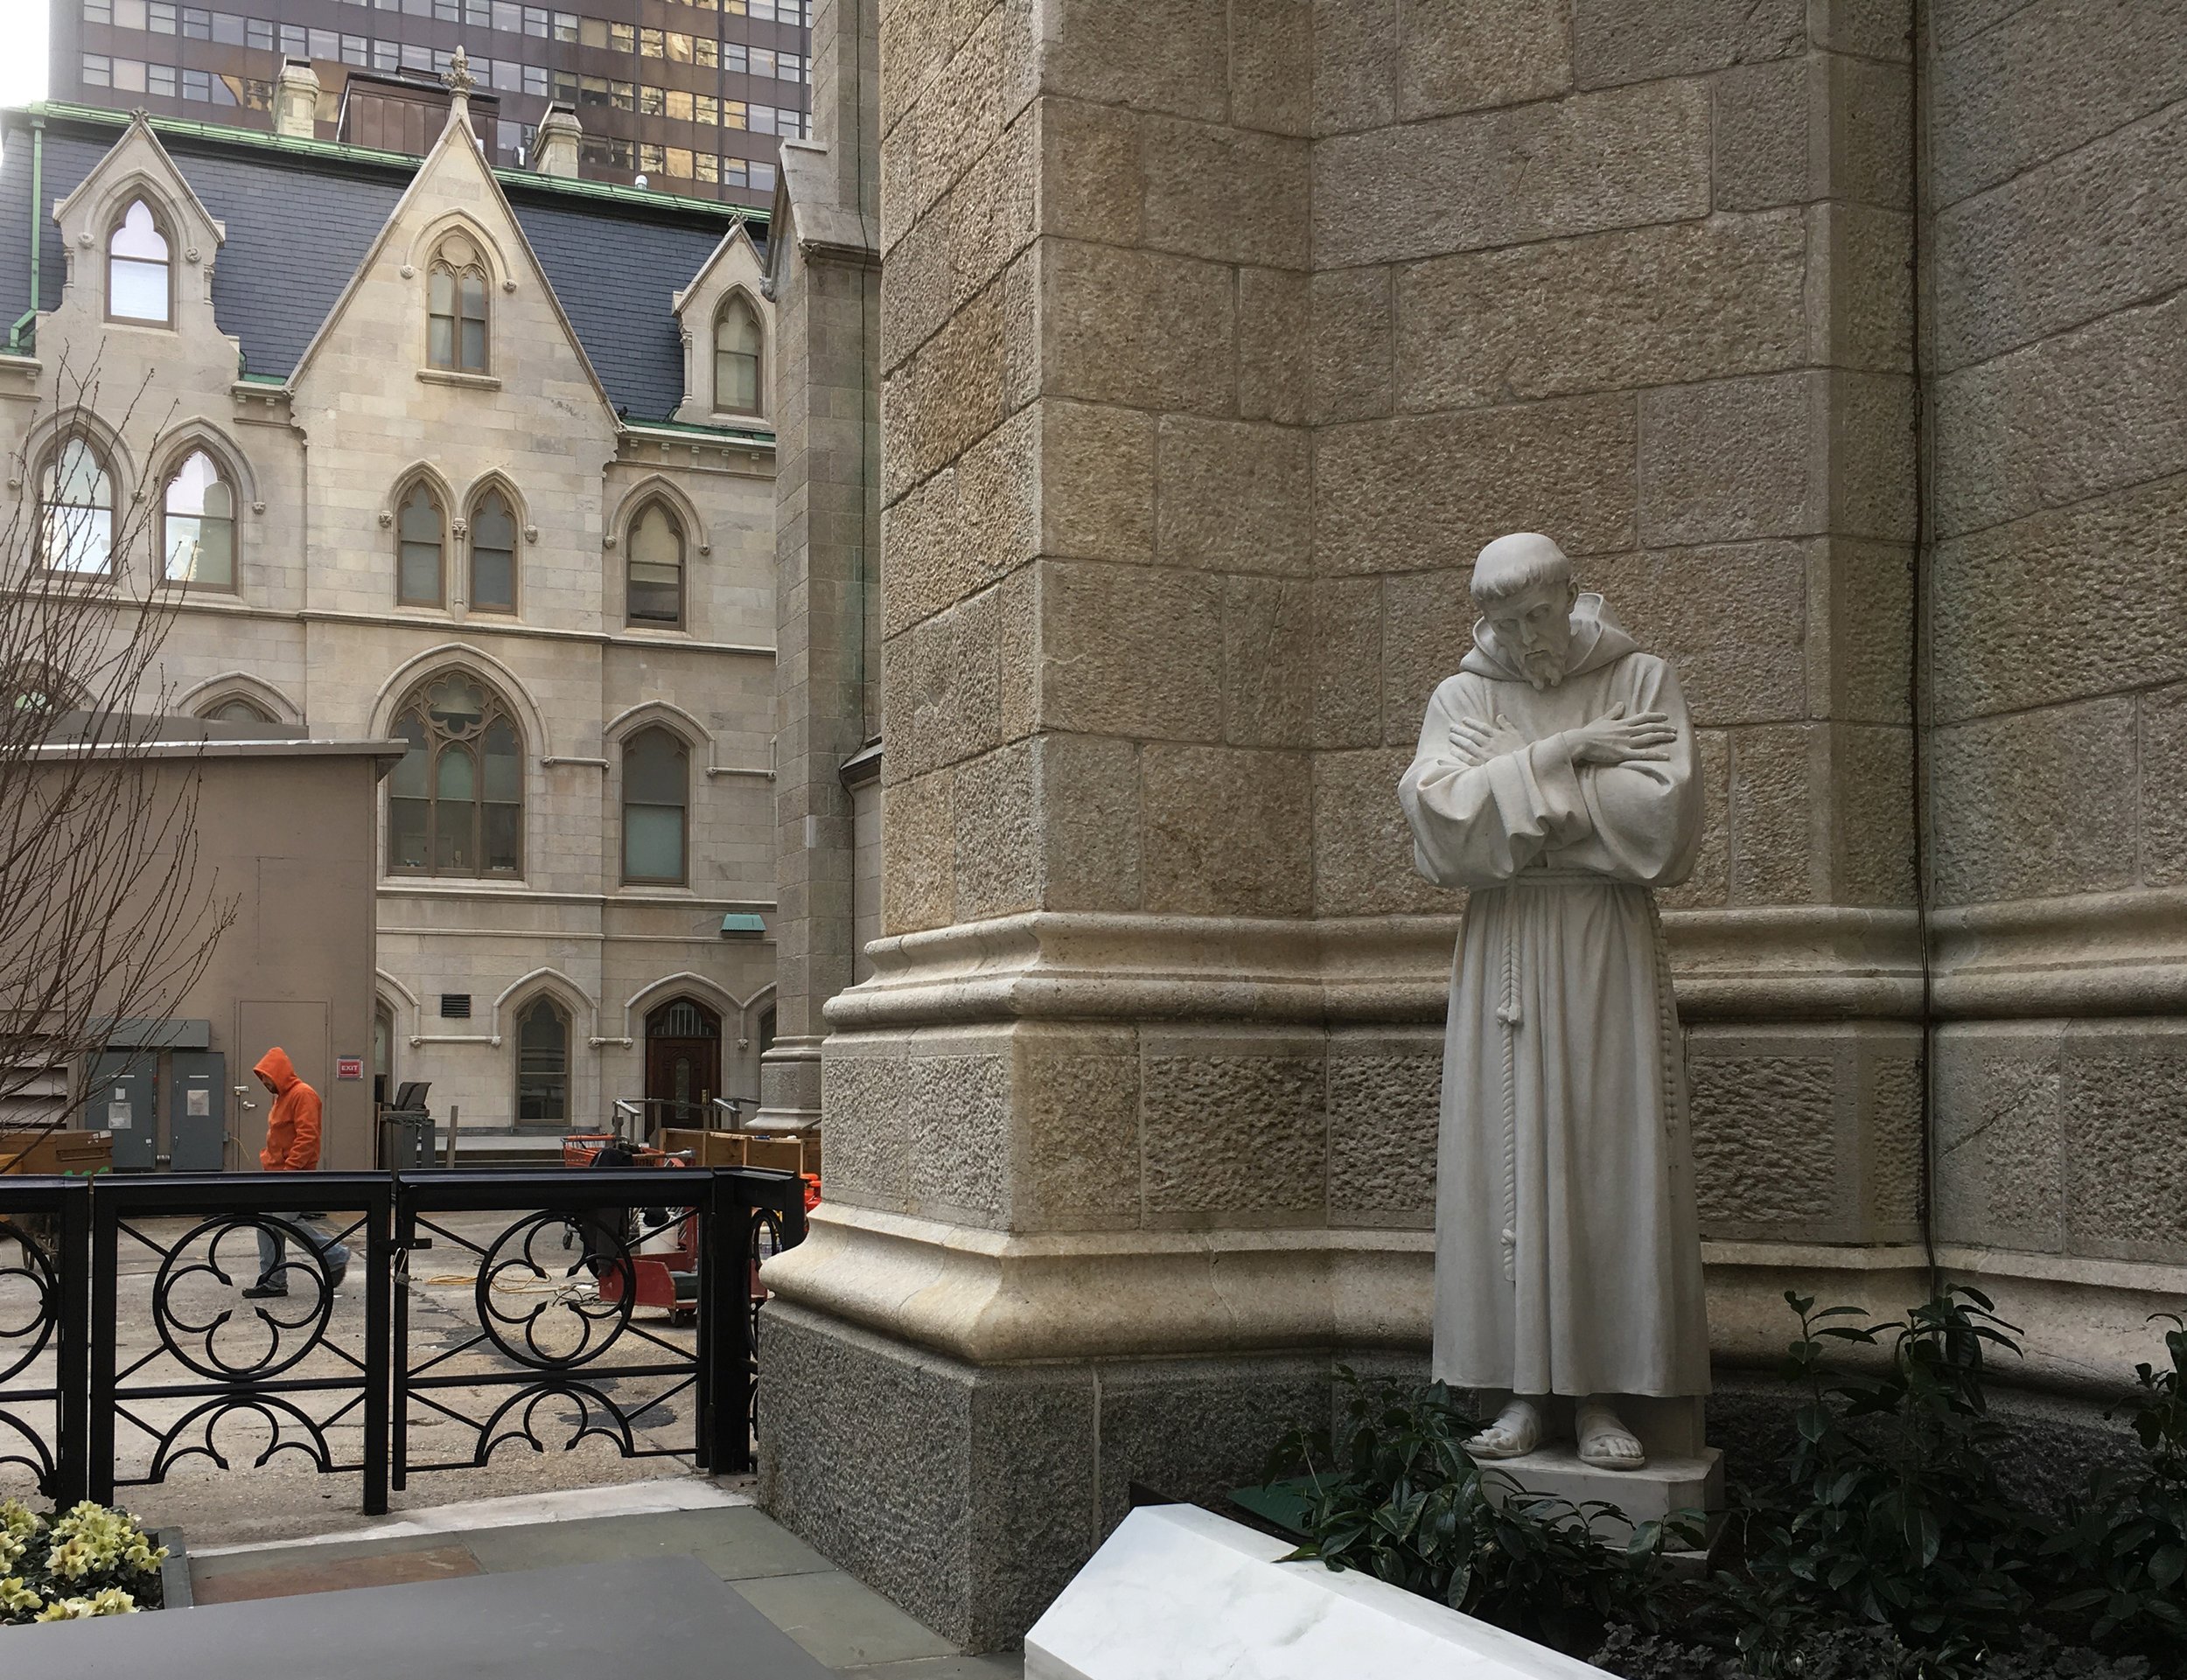  St. Patrick’s Cathedral,&nbsp; New York City, 2017 